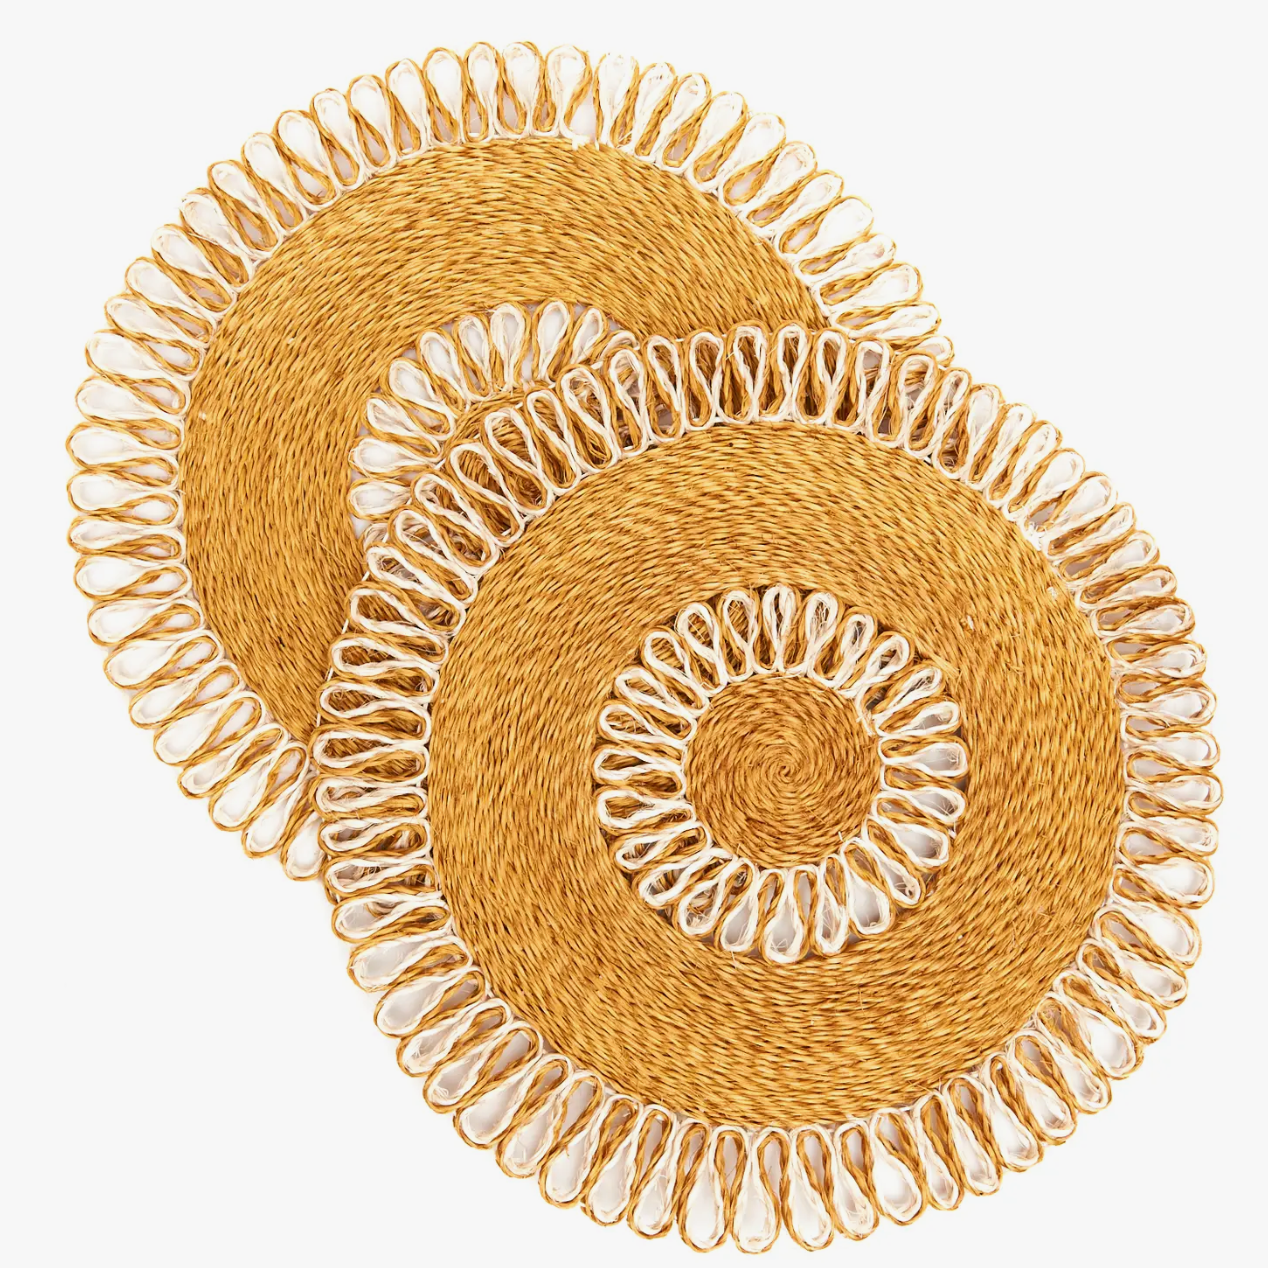 Araw Woven Placemat in Abaca, Set of 2